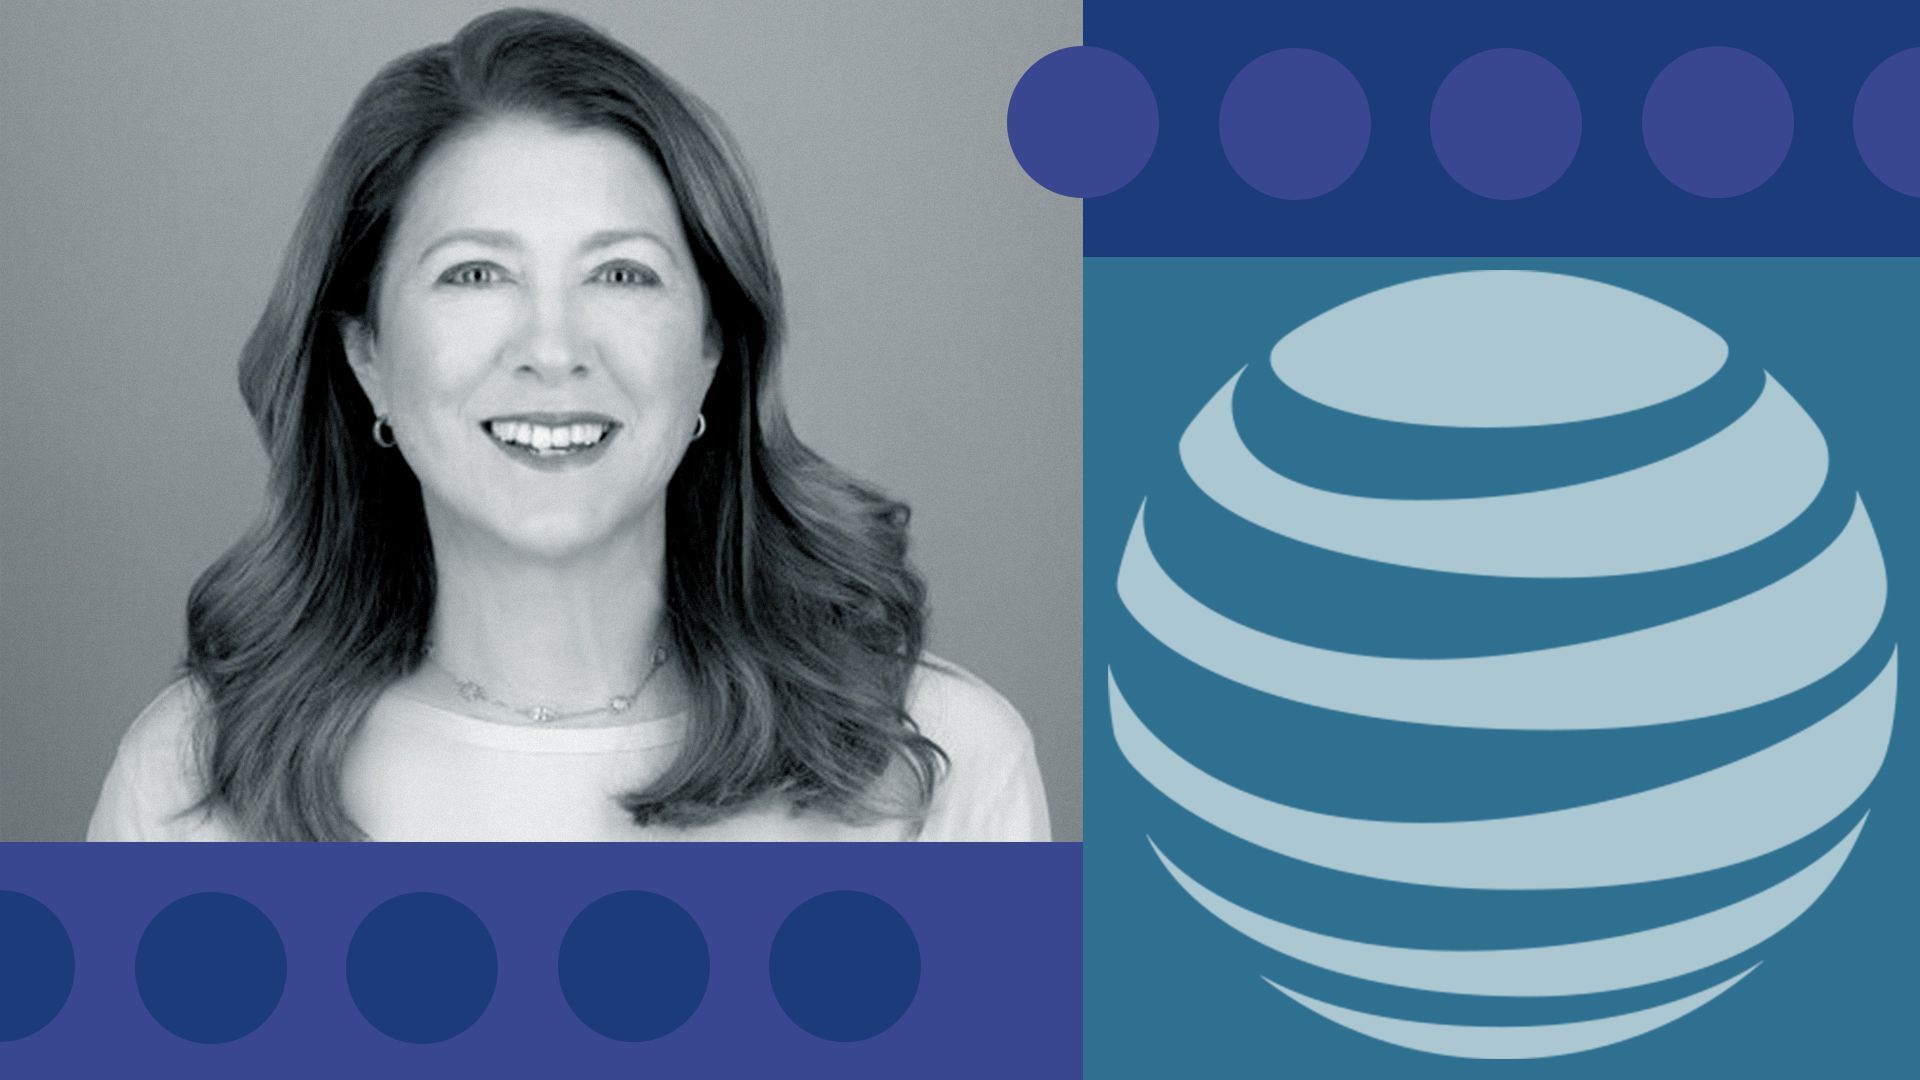 Photo illustration of Krista Pilot with geometric shapes and AT&T's logo.